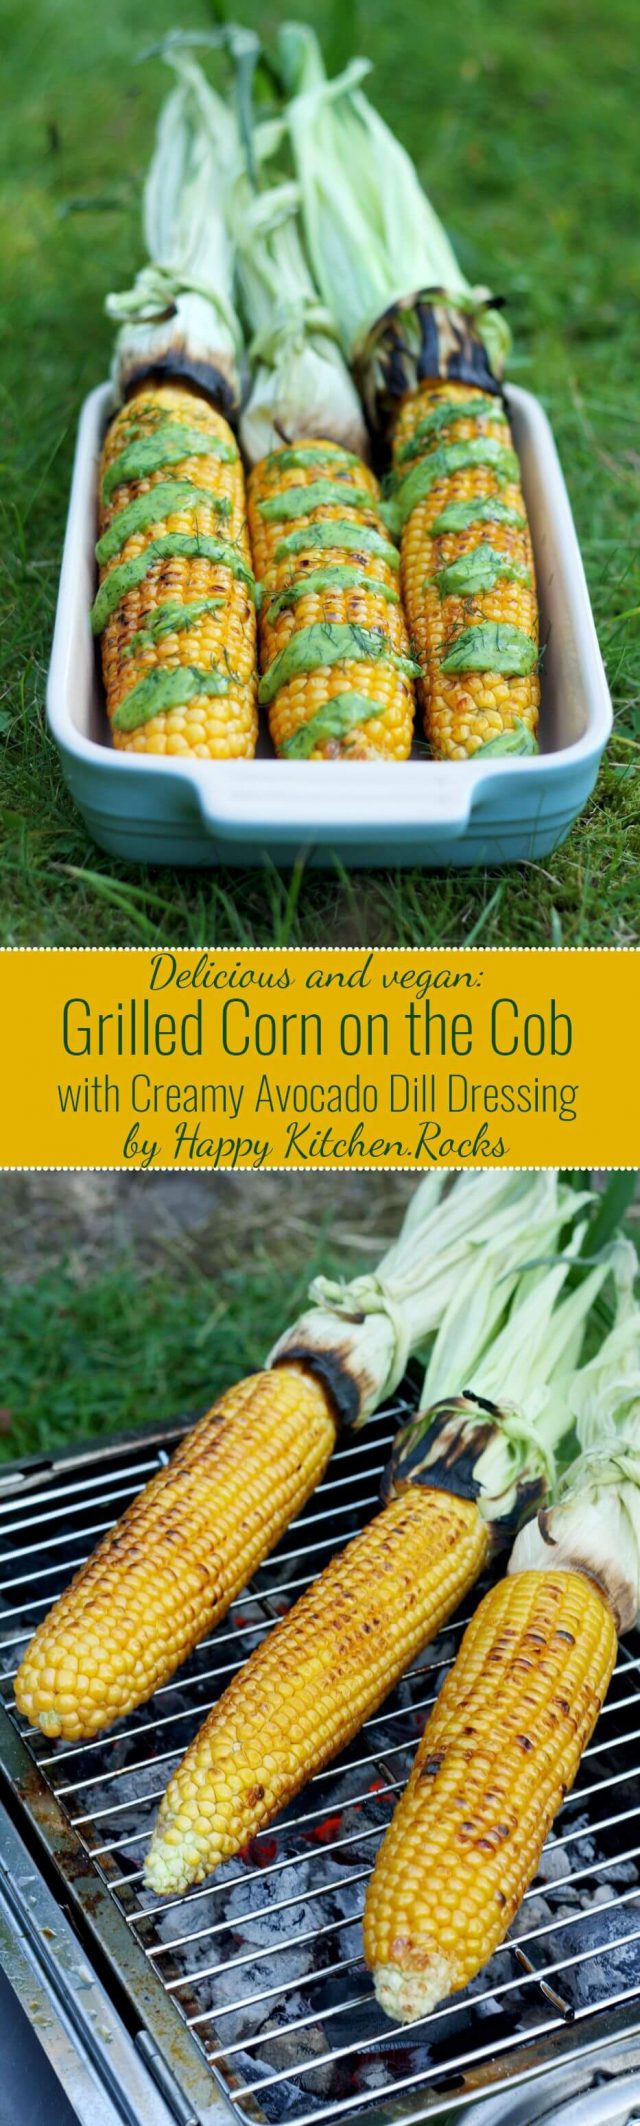 Perfectly Grilled Corn on the Cob is very juicy and pairs so well with creamy vegan avocado dill dressing. Easy and impressive recipe for your summer barbecue!